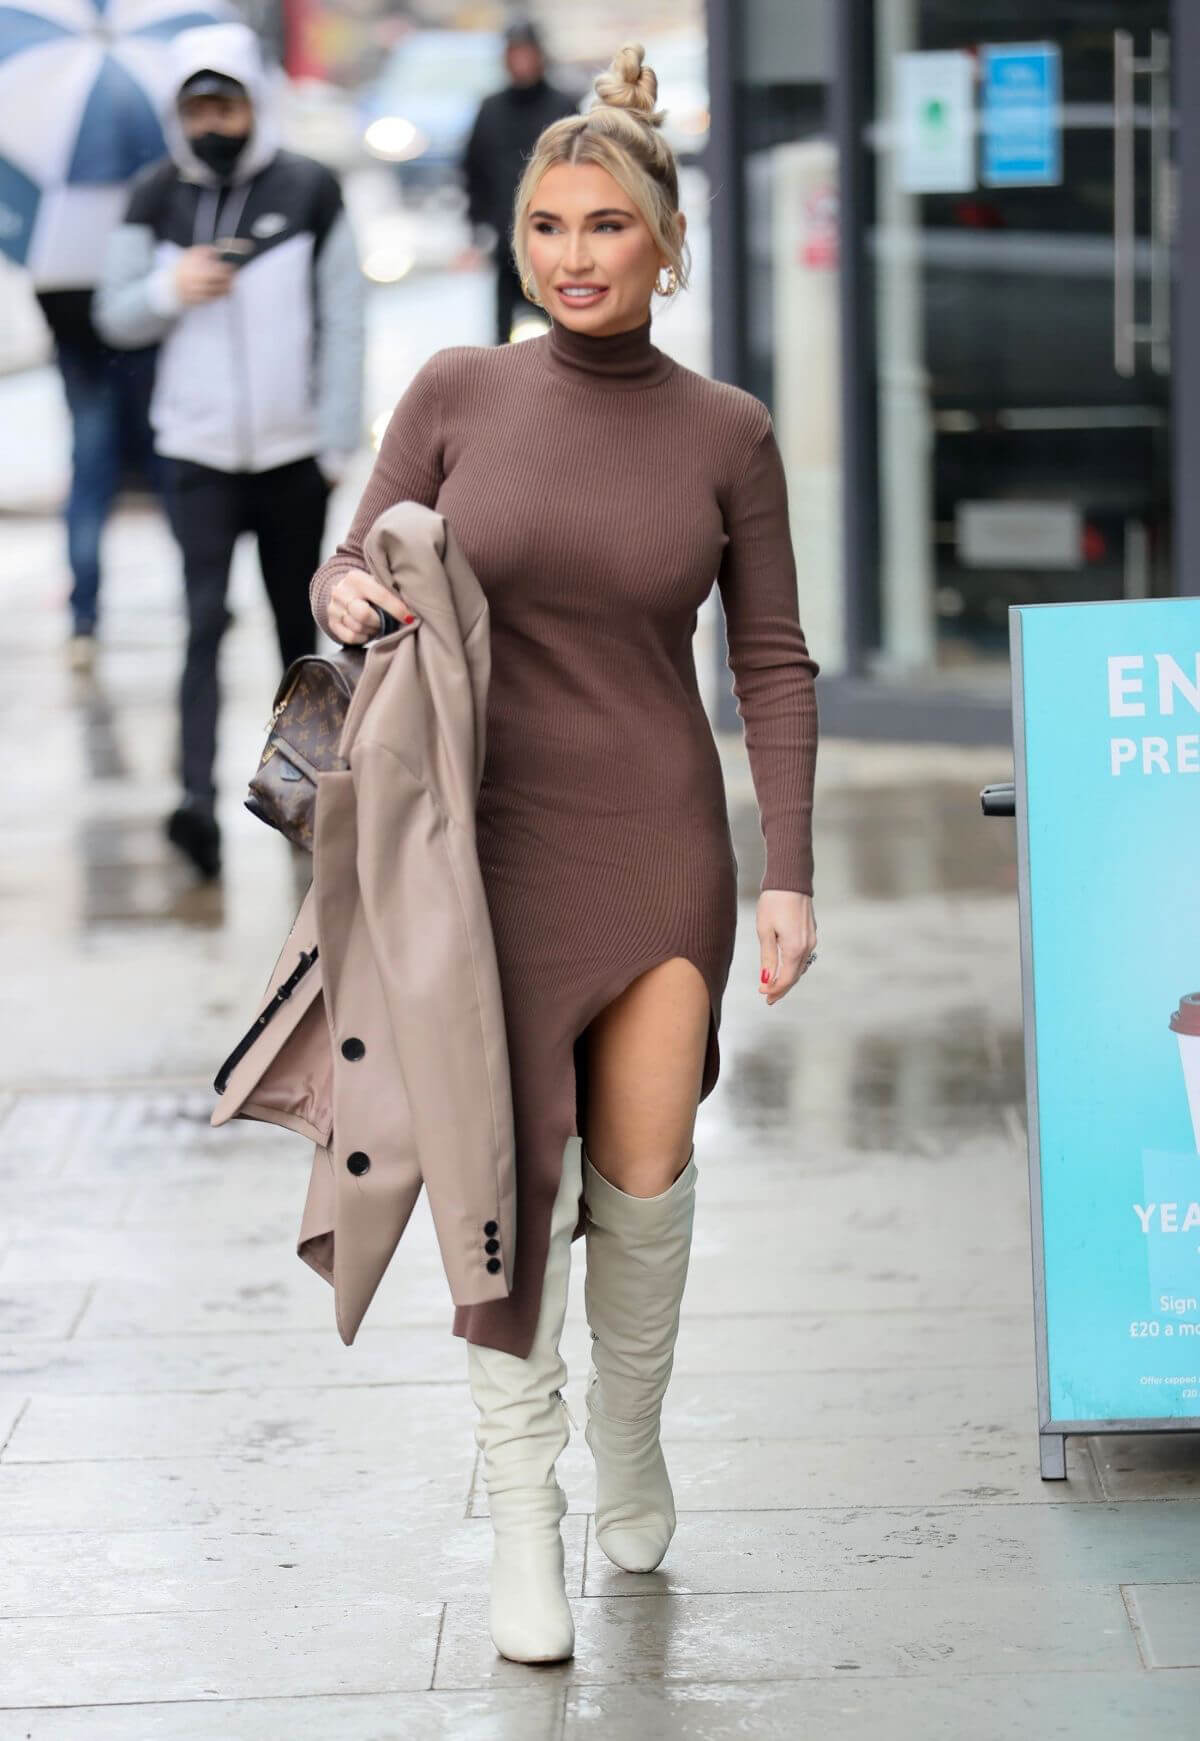 Billie Faiers in Thigh-High Split Dress Out and About in London 03/10/2021